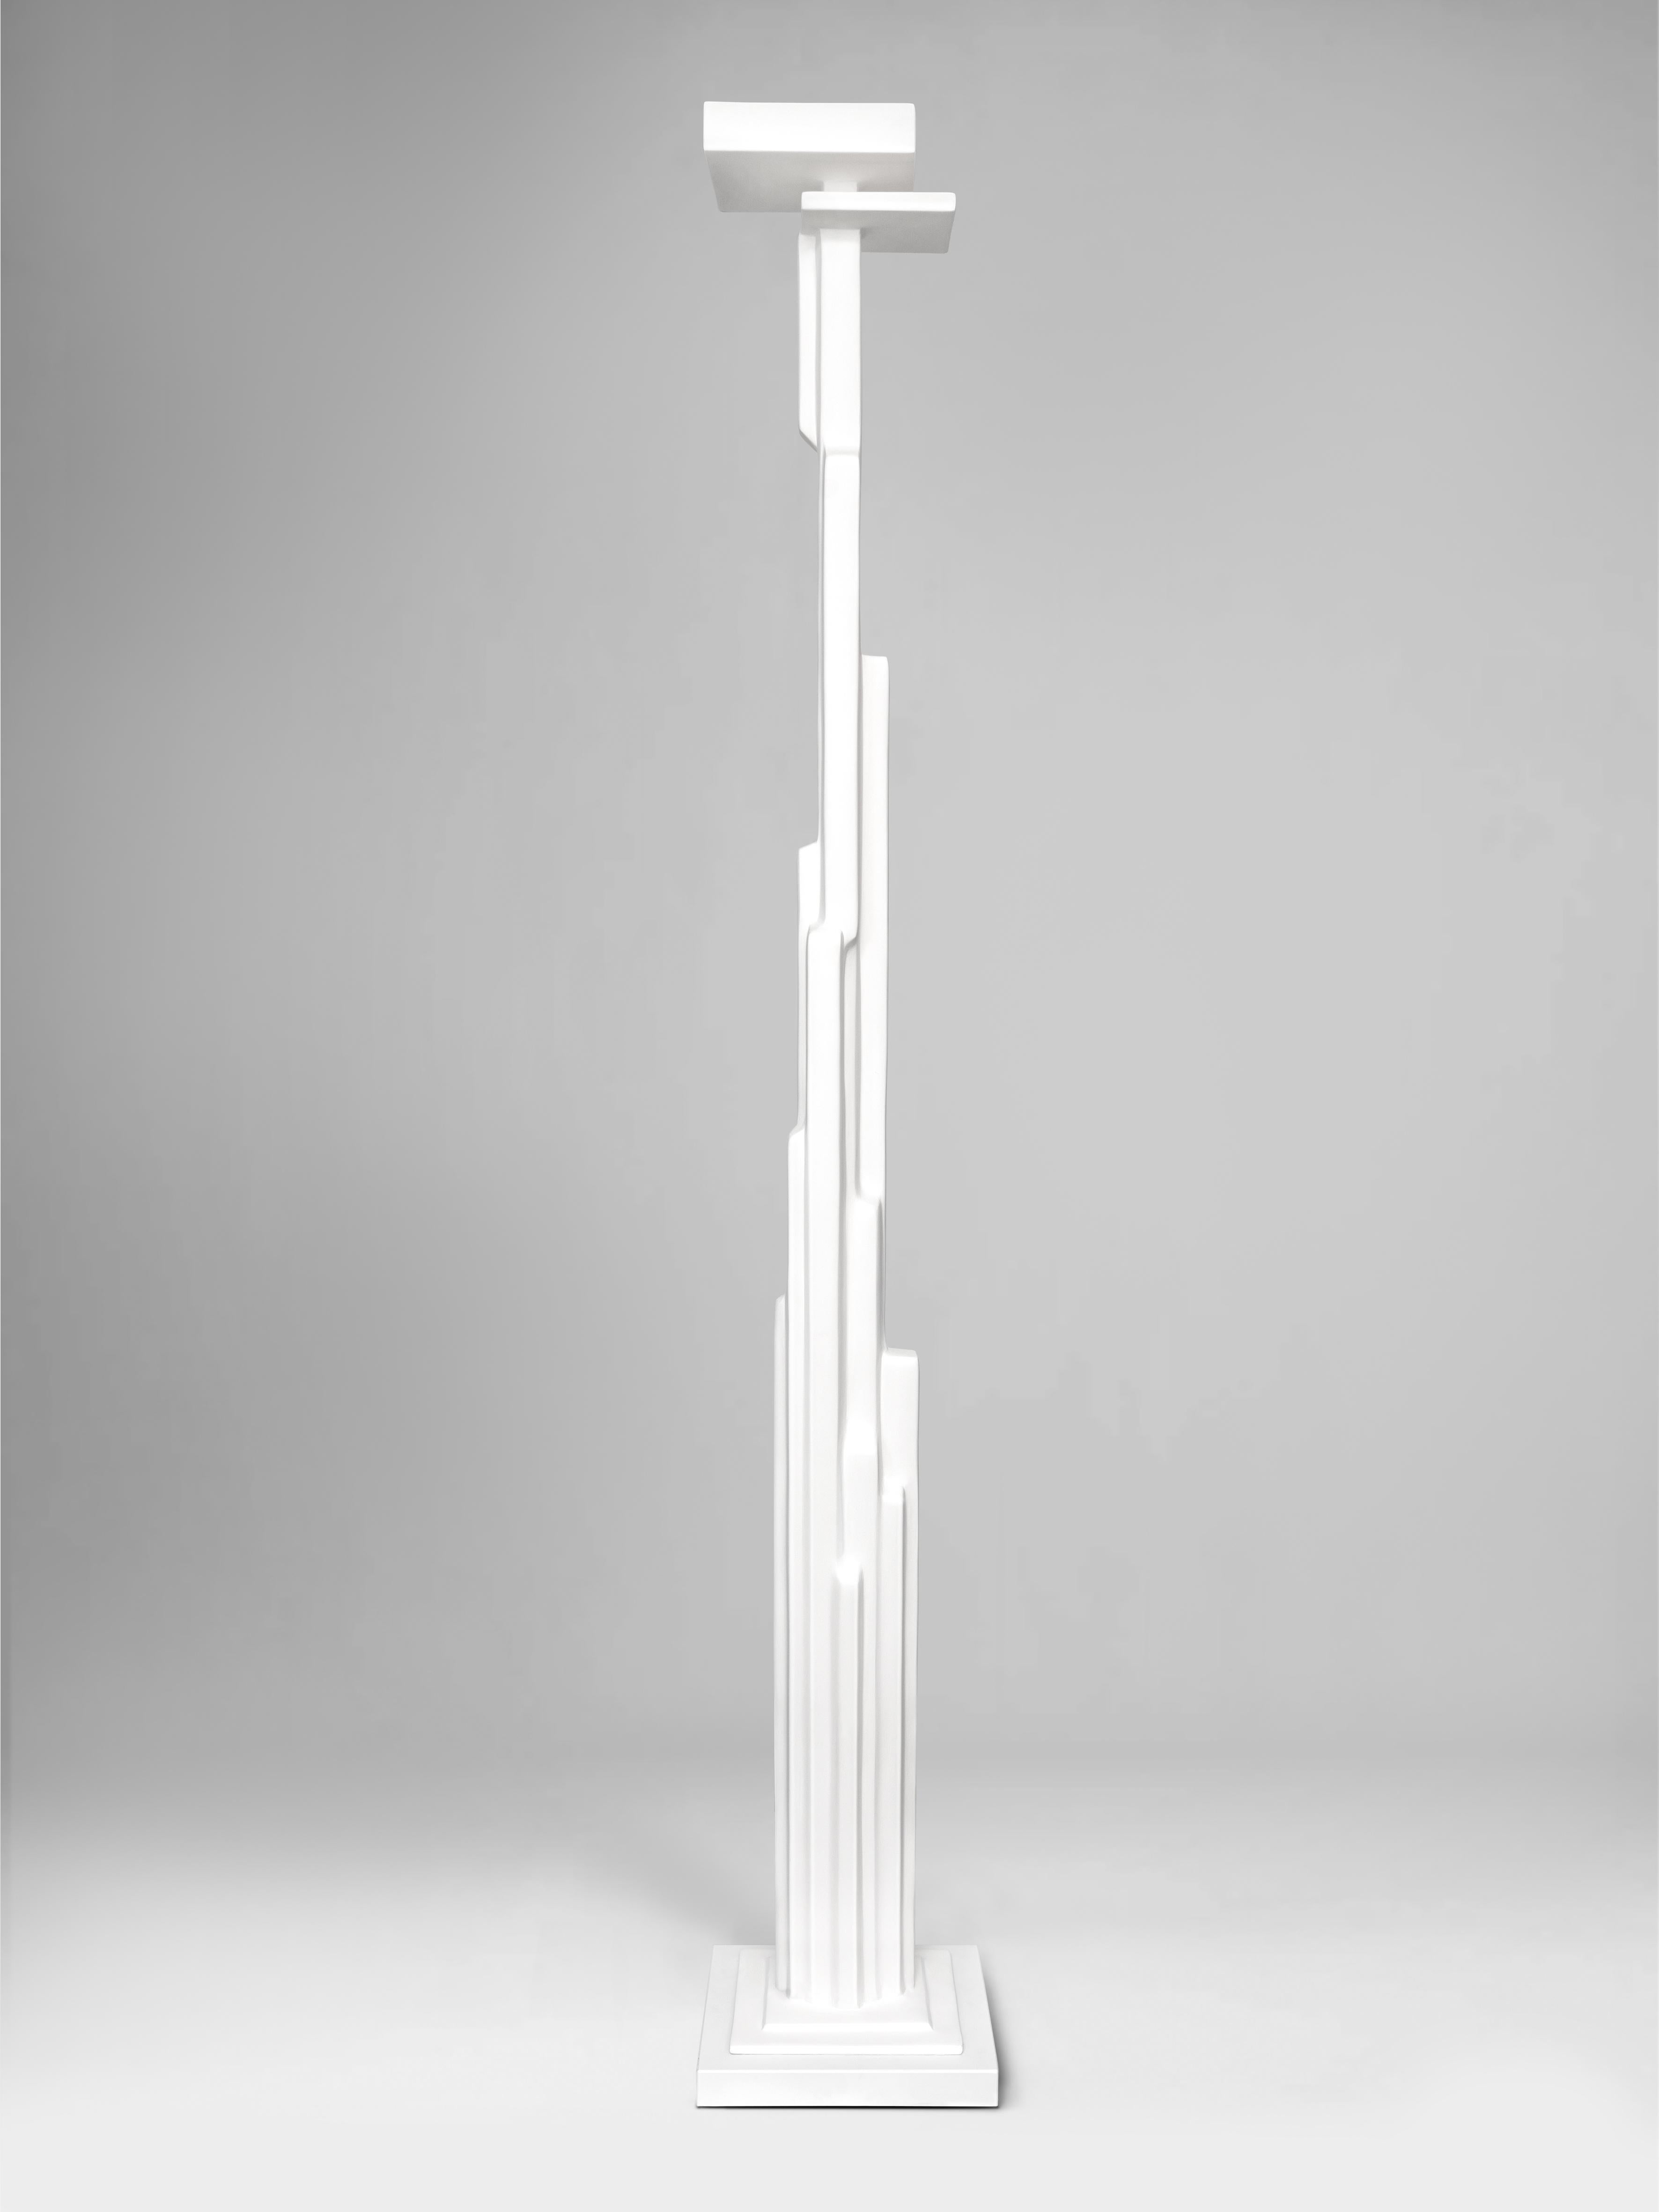 Assembled with various lengths of cut and joined steel bar on a White Quarzstone base, the Manhattan Floor Lamp resembles visual verticality of New York’s buildings. Hand sculpted and unique.  Uplighter with one bulb. 

SHIPPING  
* Please contact